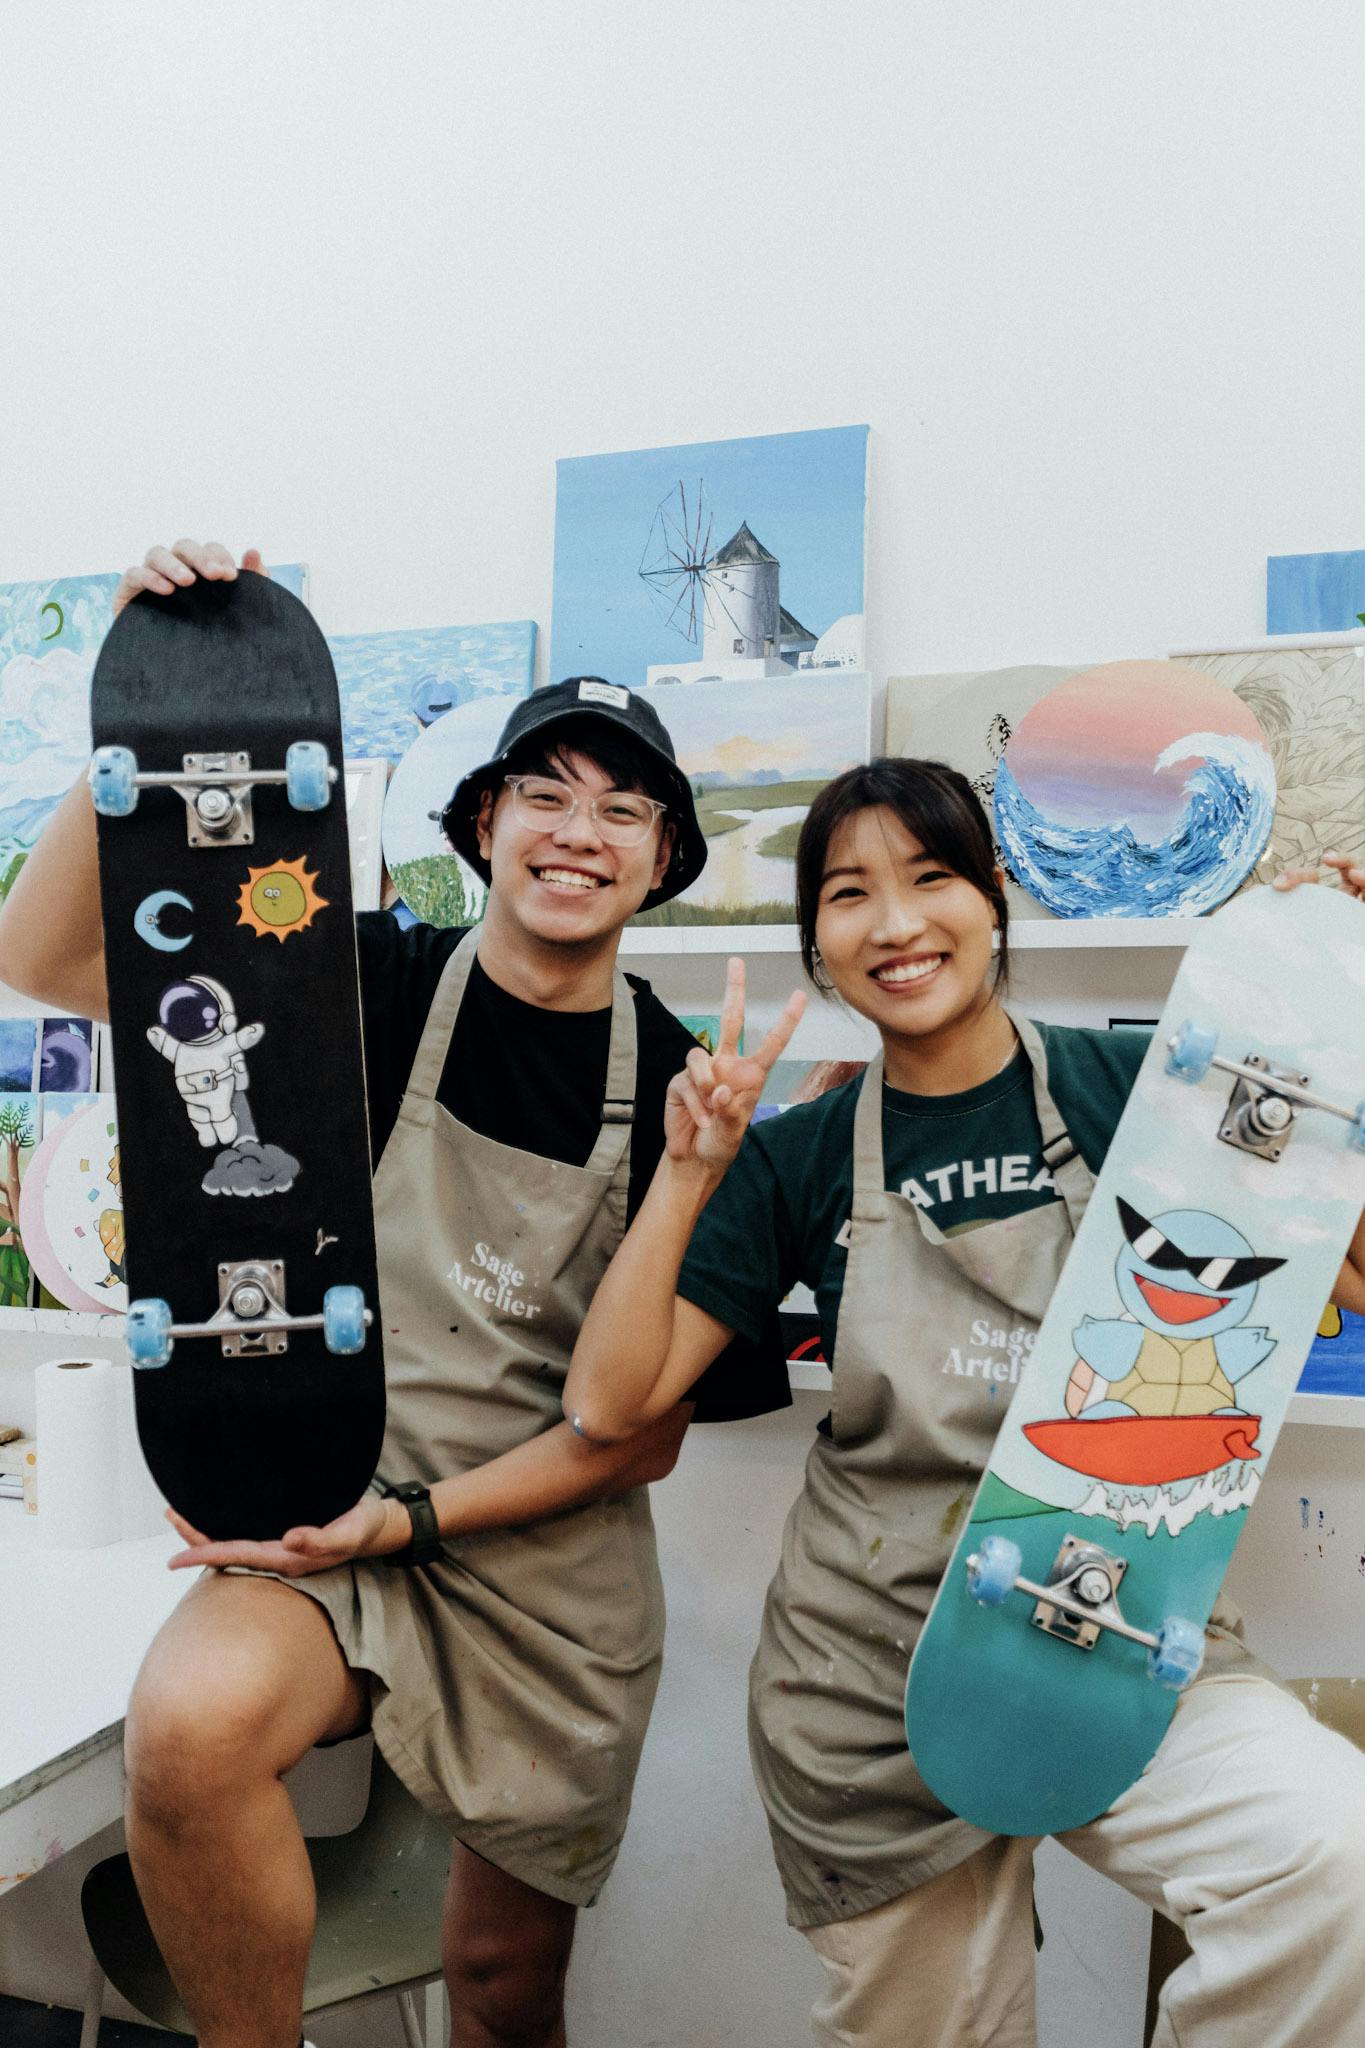 Up your street cred with your custom skateboards